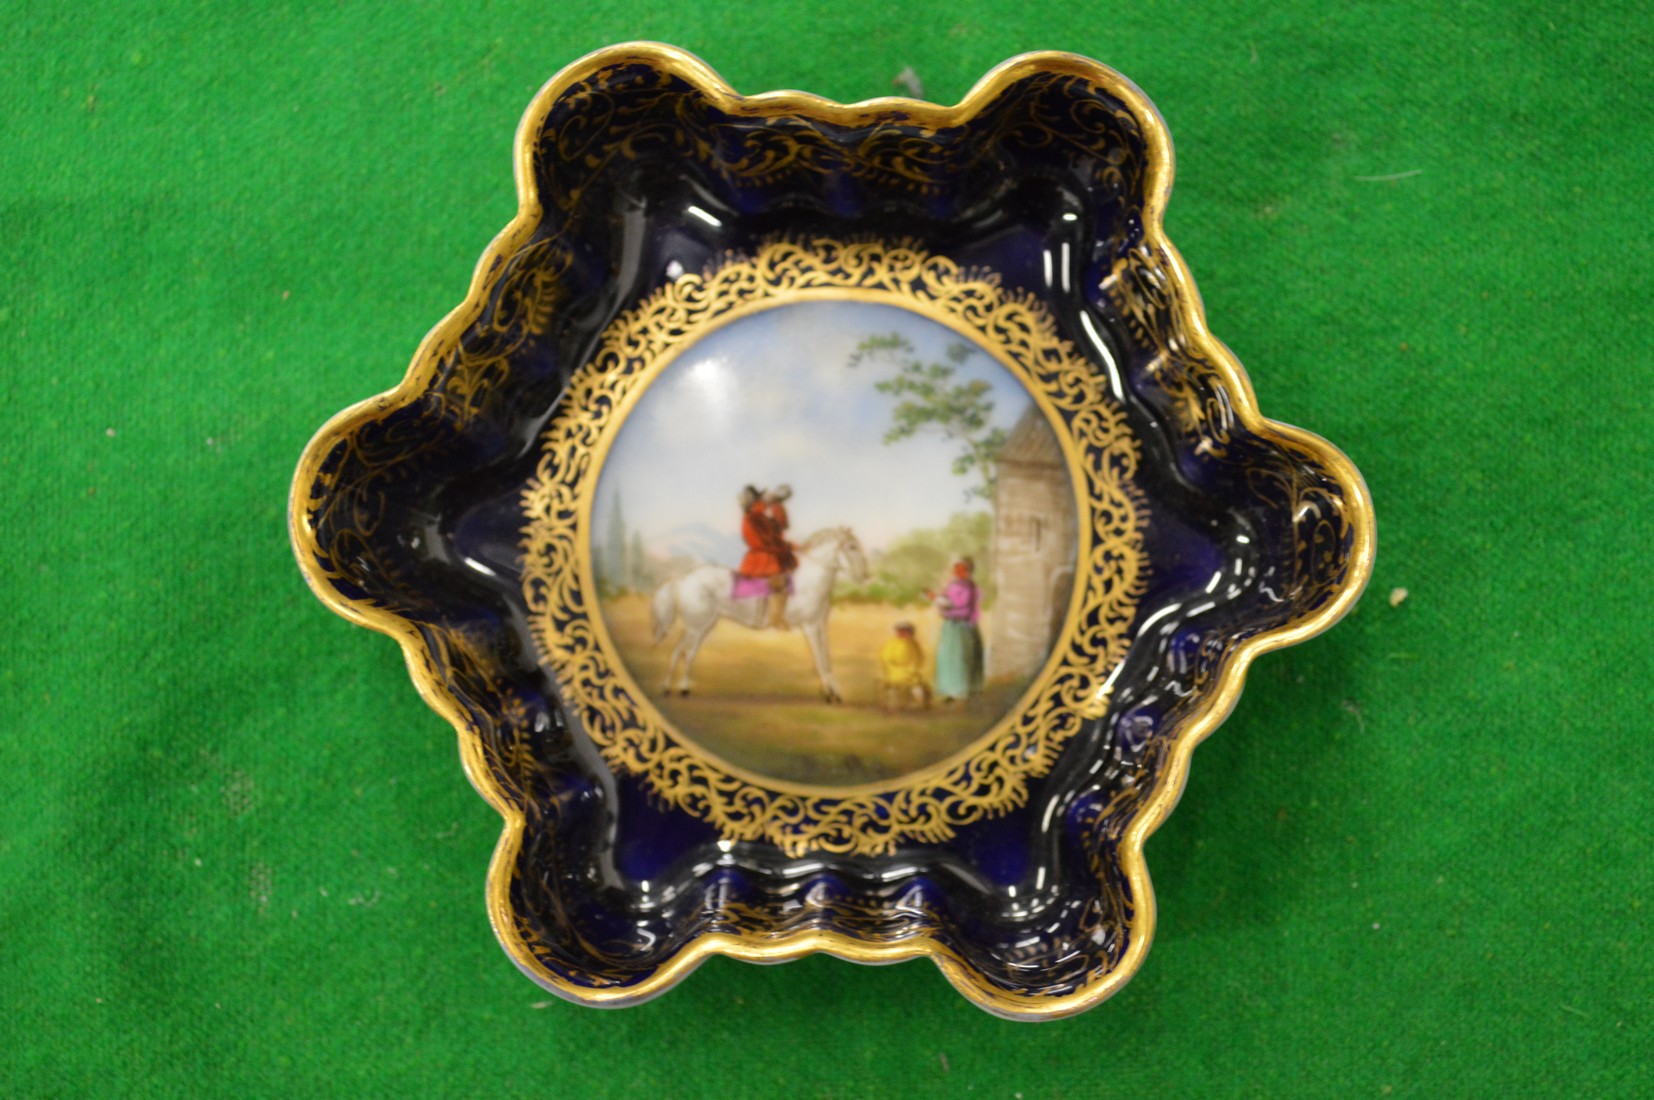 A continental porcelain small dish painted with a figure on horseback.